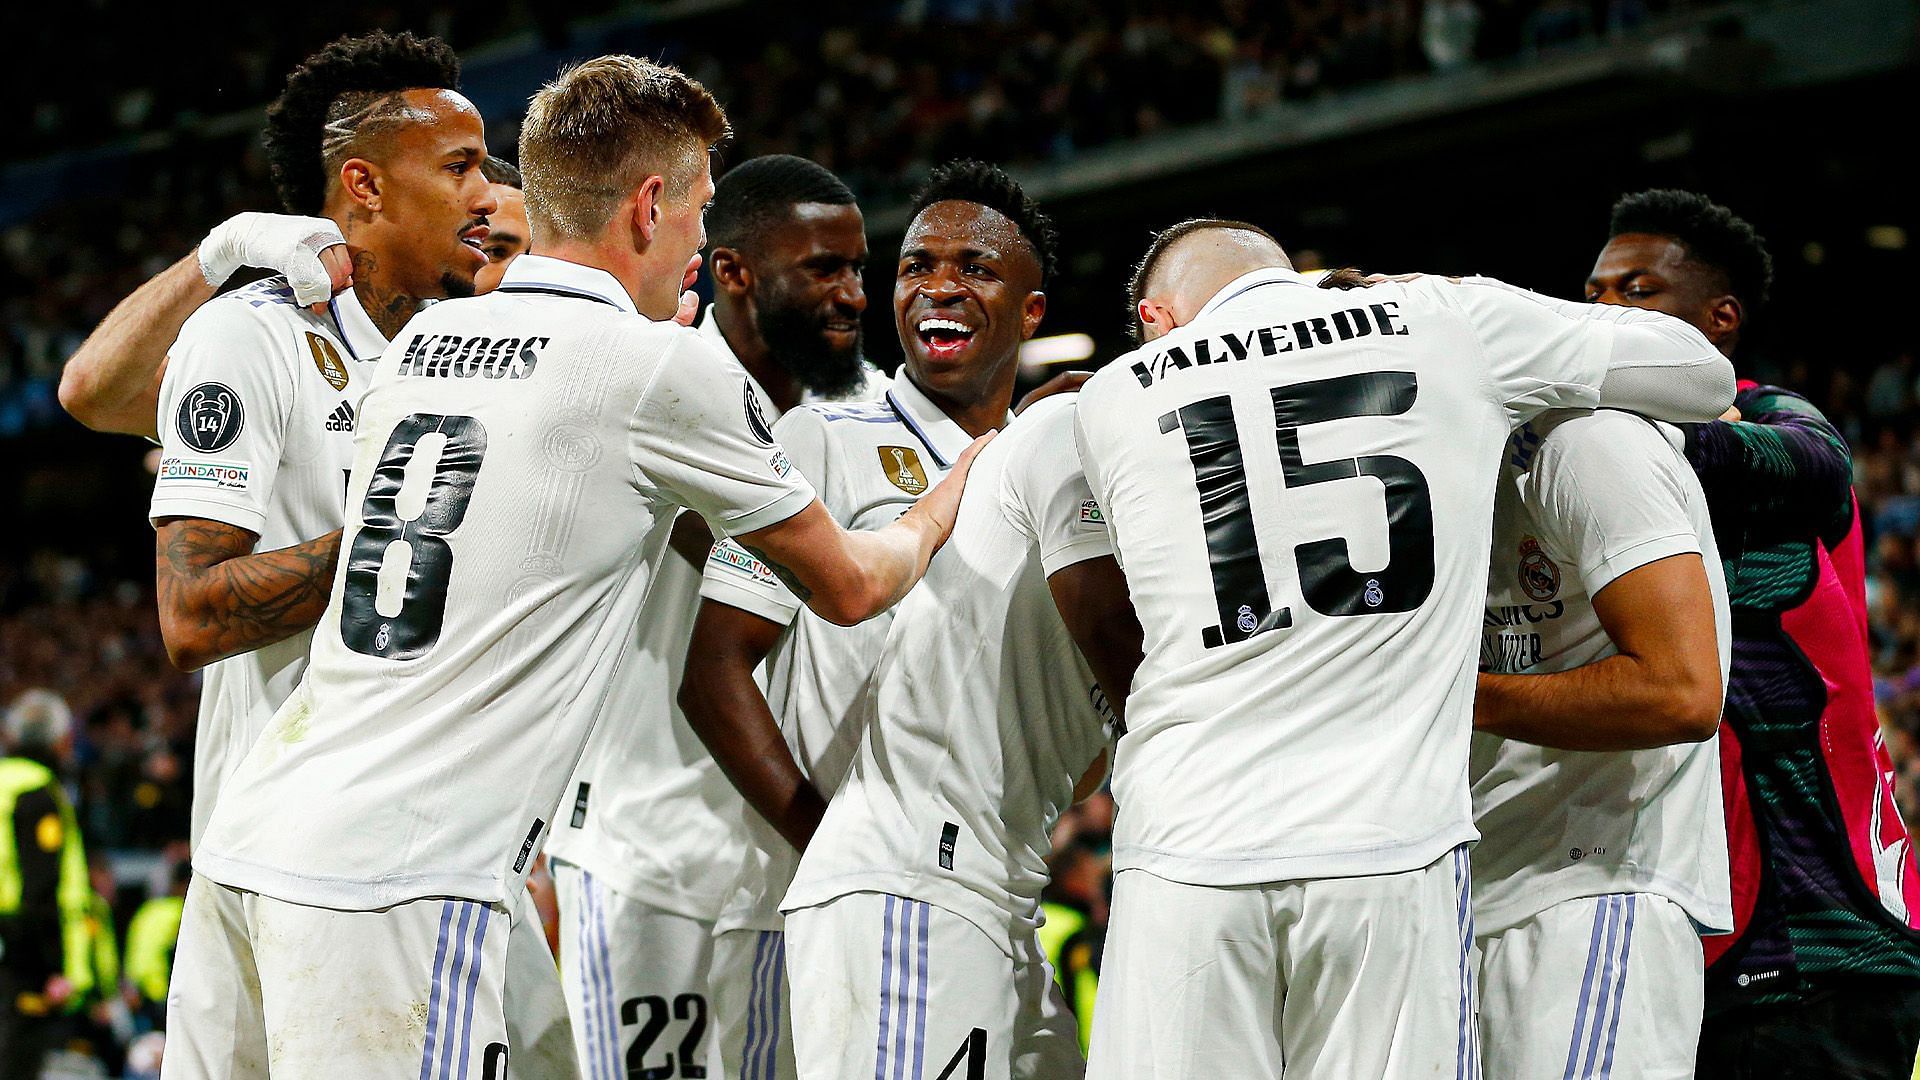 Real Madrid put Chelsea to the sword in their UEFA Champions League quarter-final first leg clash